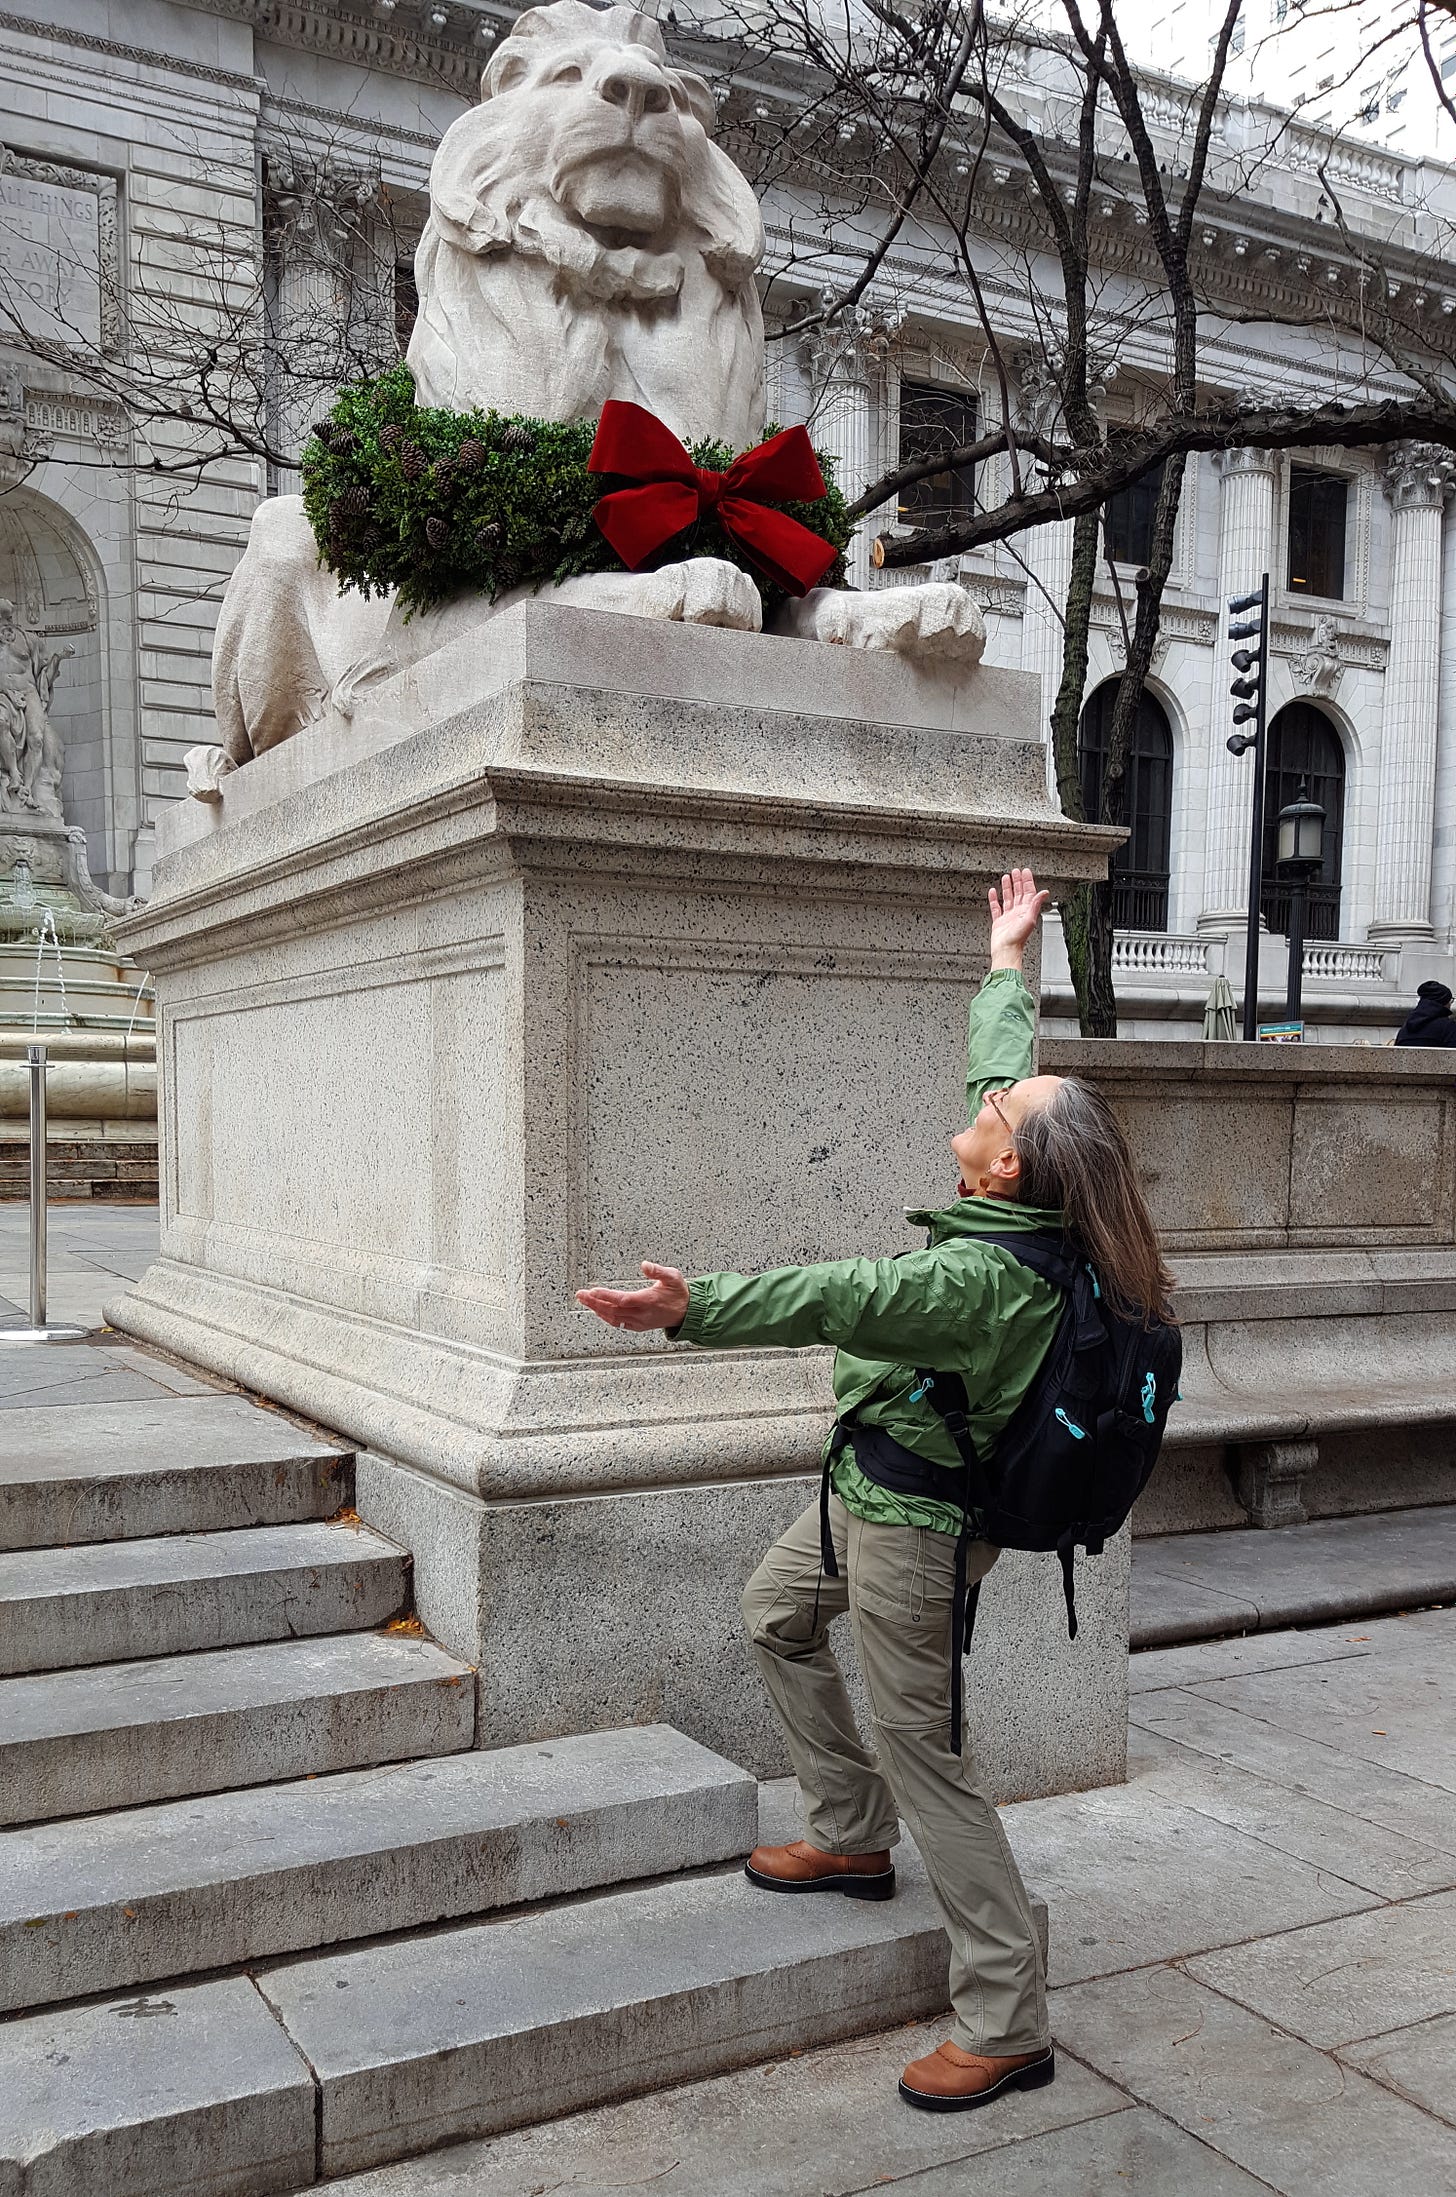 Jodi in a green jacket, cowboy boots and backpack with hair flowing down her back. She is facing away from the camera with arms outstretched and looking up at a stone lion outside the New York City Public Library. The lion has a red-bowed wreath around its neck.